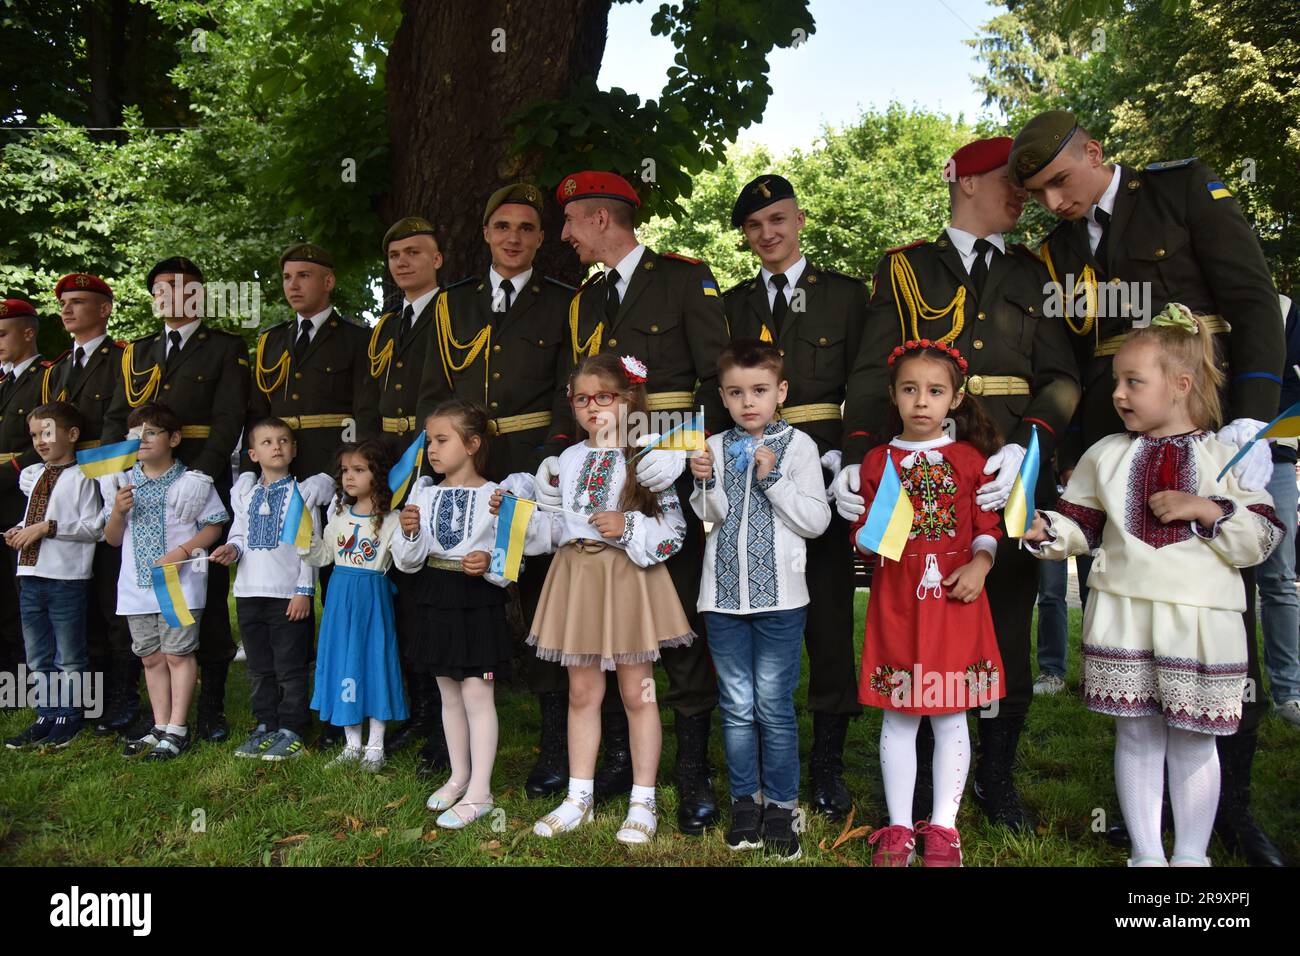 Cadets stand with children during the celebration of the Constitution Day of Ukraine. Ukraine celebrated the 27th anniversary of the adoption of the country's basic law - the constitution. In the conditions of the Russian-Ukrainian war, official events were very short. In Lviv, the Ukrainian flag was raised, honor guard marched, and a military band performed. (Photo by Pavlo Palamarchuk / SOPA mages/Sipa USA) Stock Photo